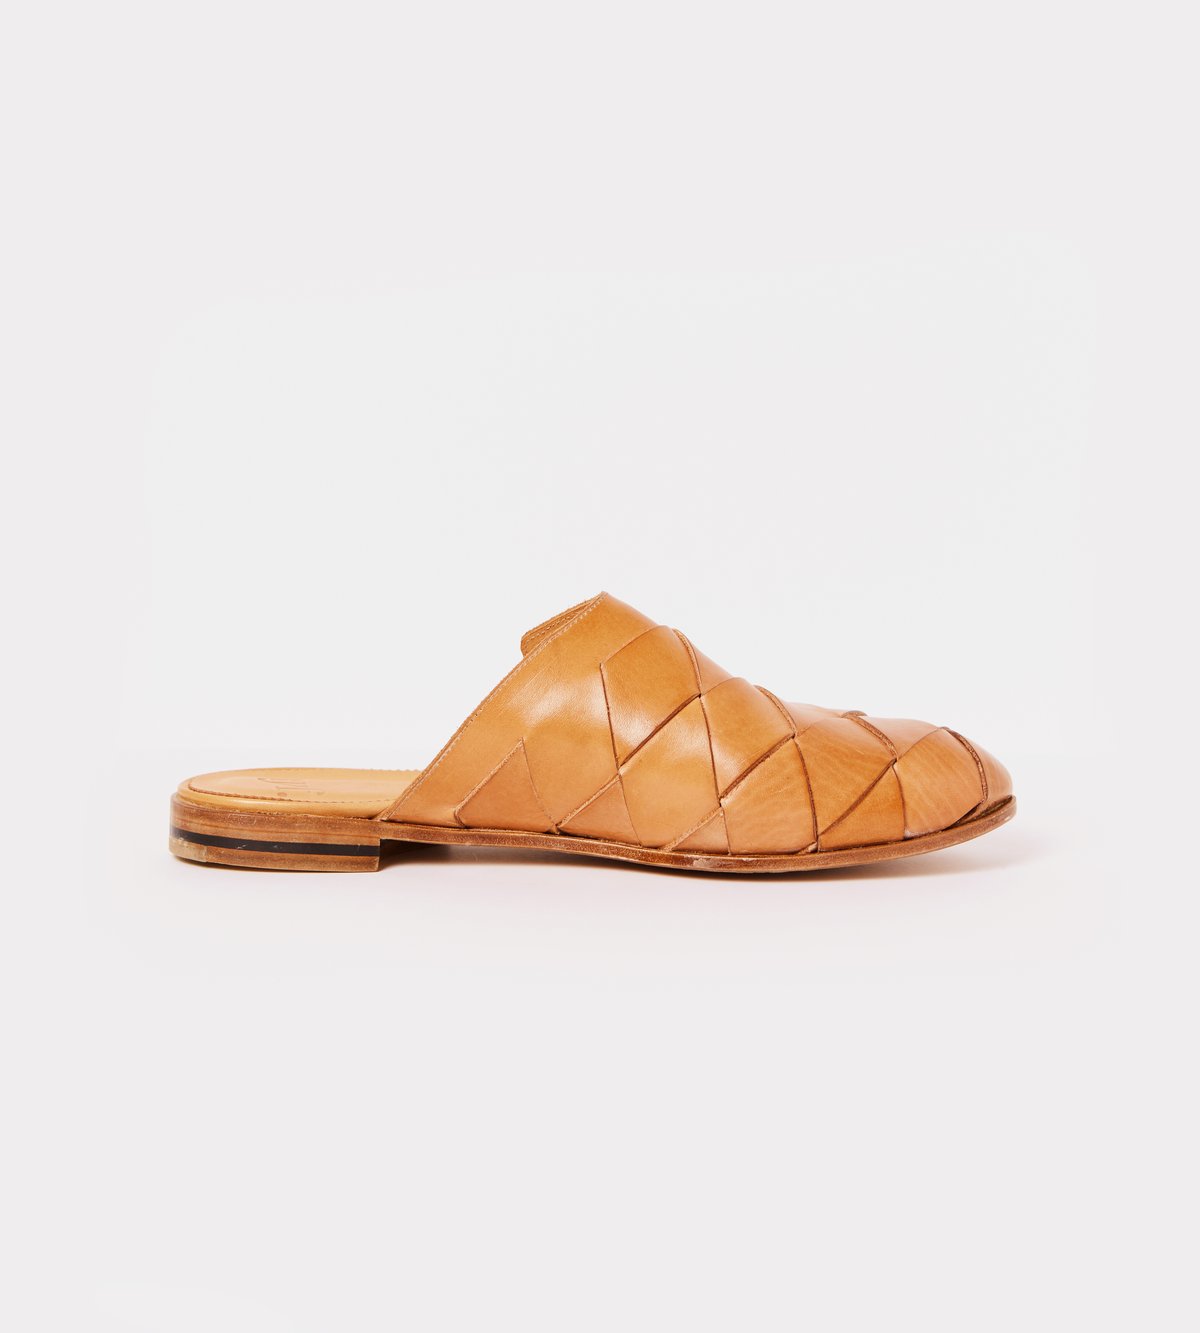 Hand woven mule in natural leather color - rigth